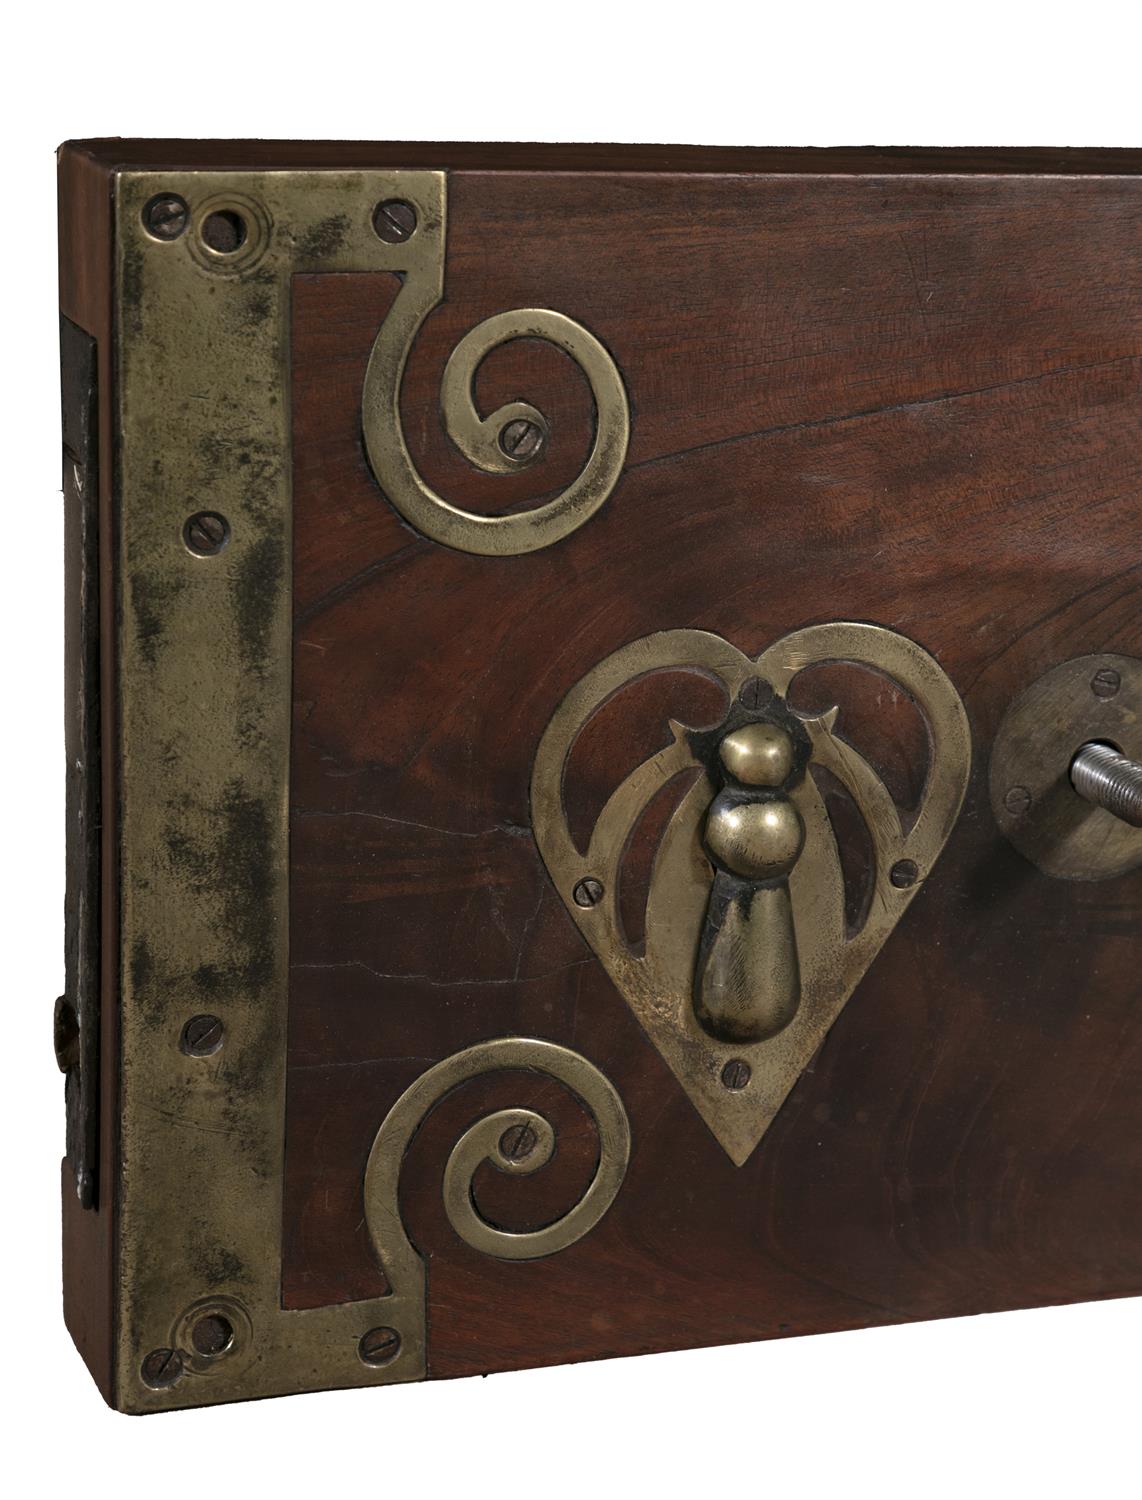 A GEORGE III MAHOGANY AND BRASS MOUNTED DOOR LOCK AND KEY the block with pierced heart-shape - Image 3 of 3